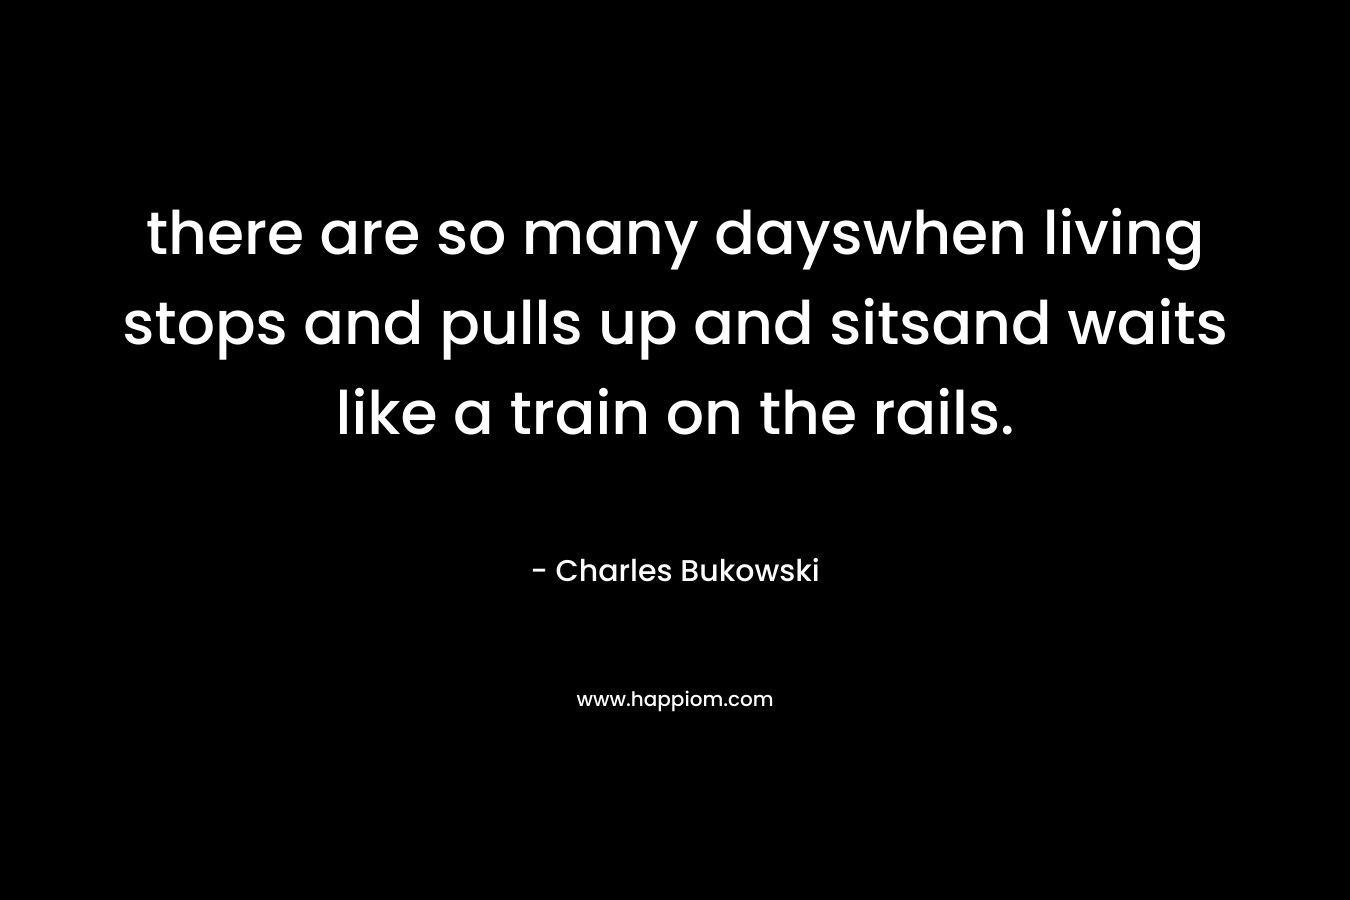 there are so many dayswhen living stops and pulls up and sitsand waits like a train on the rails. – Charles Bukowski